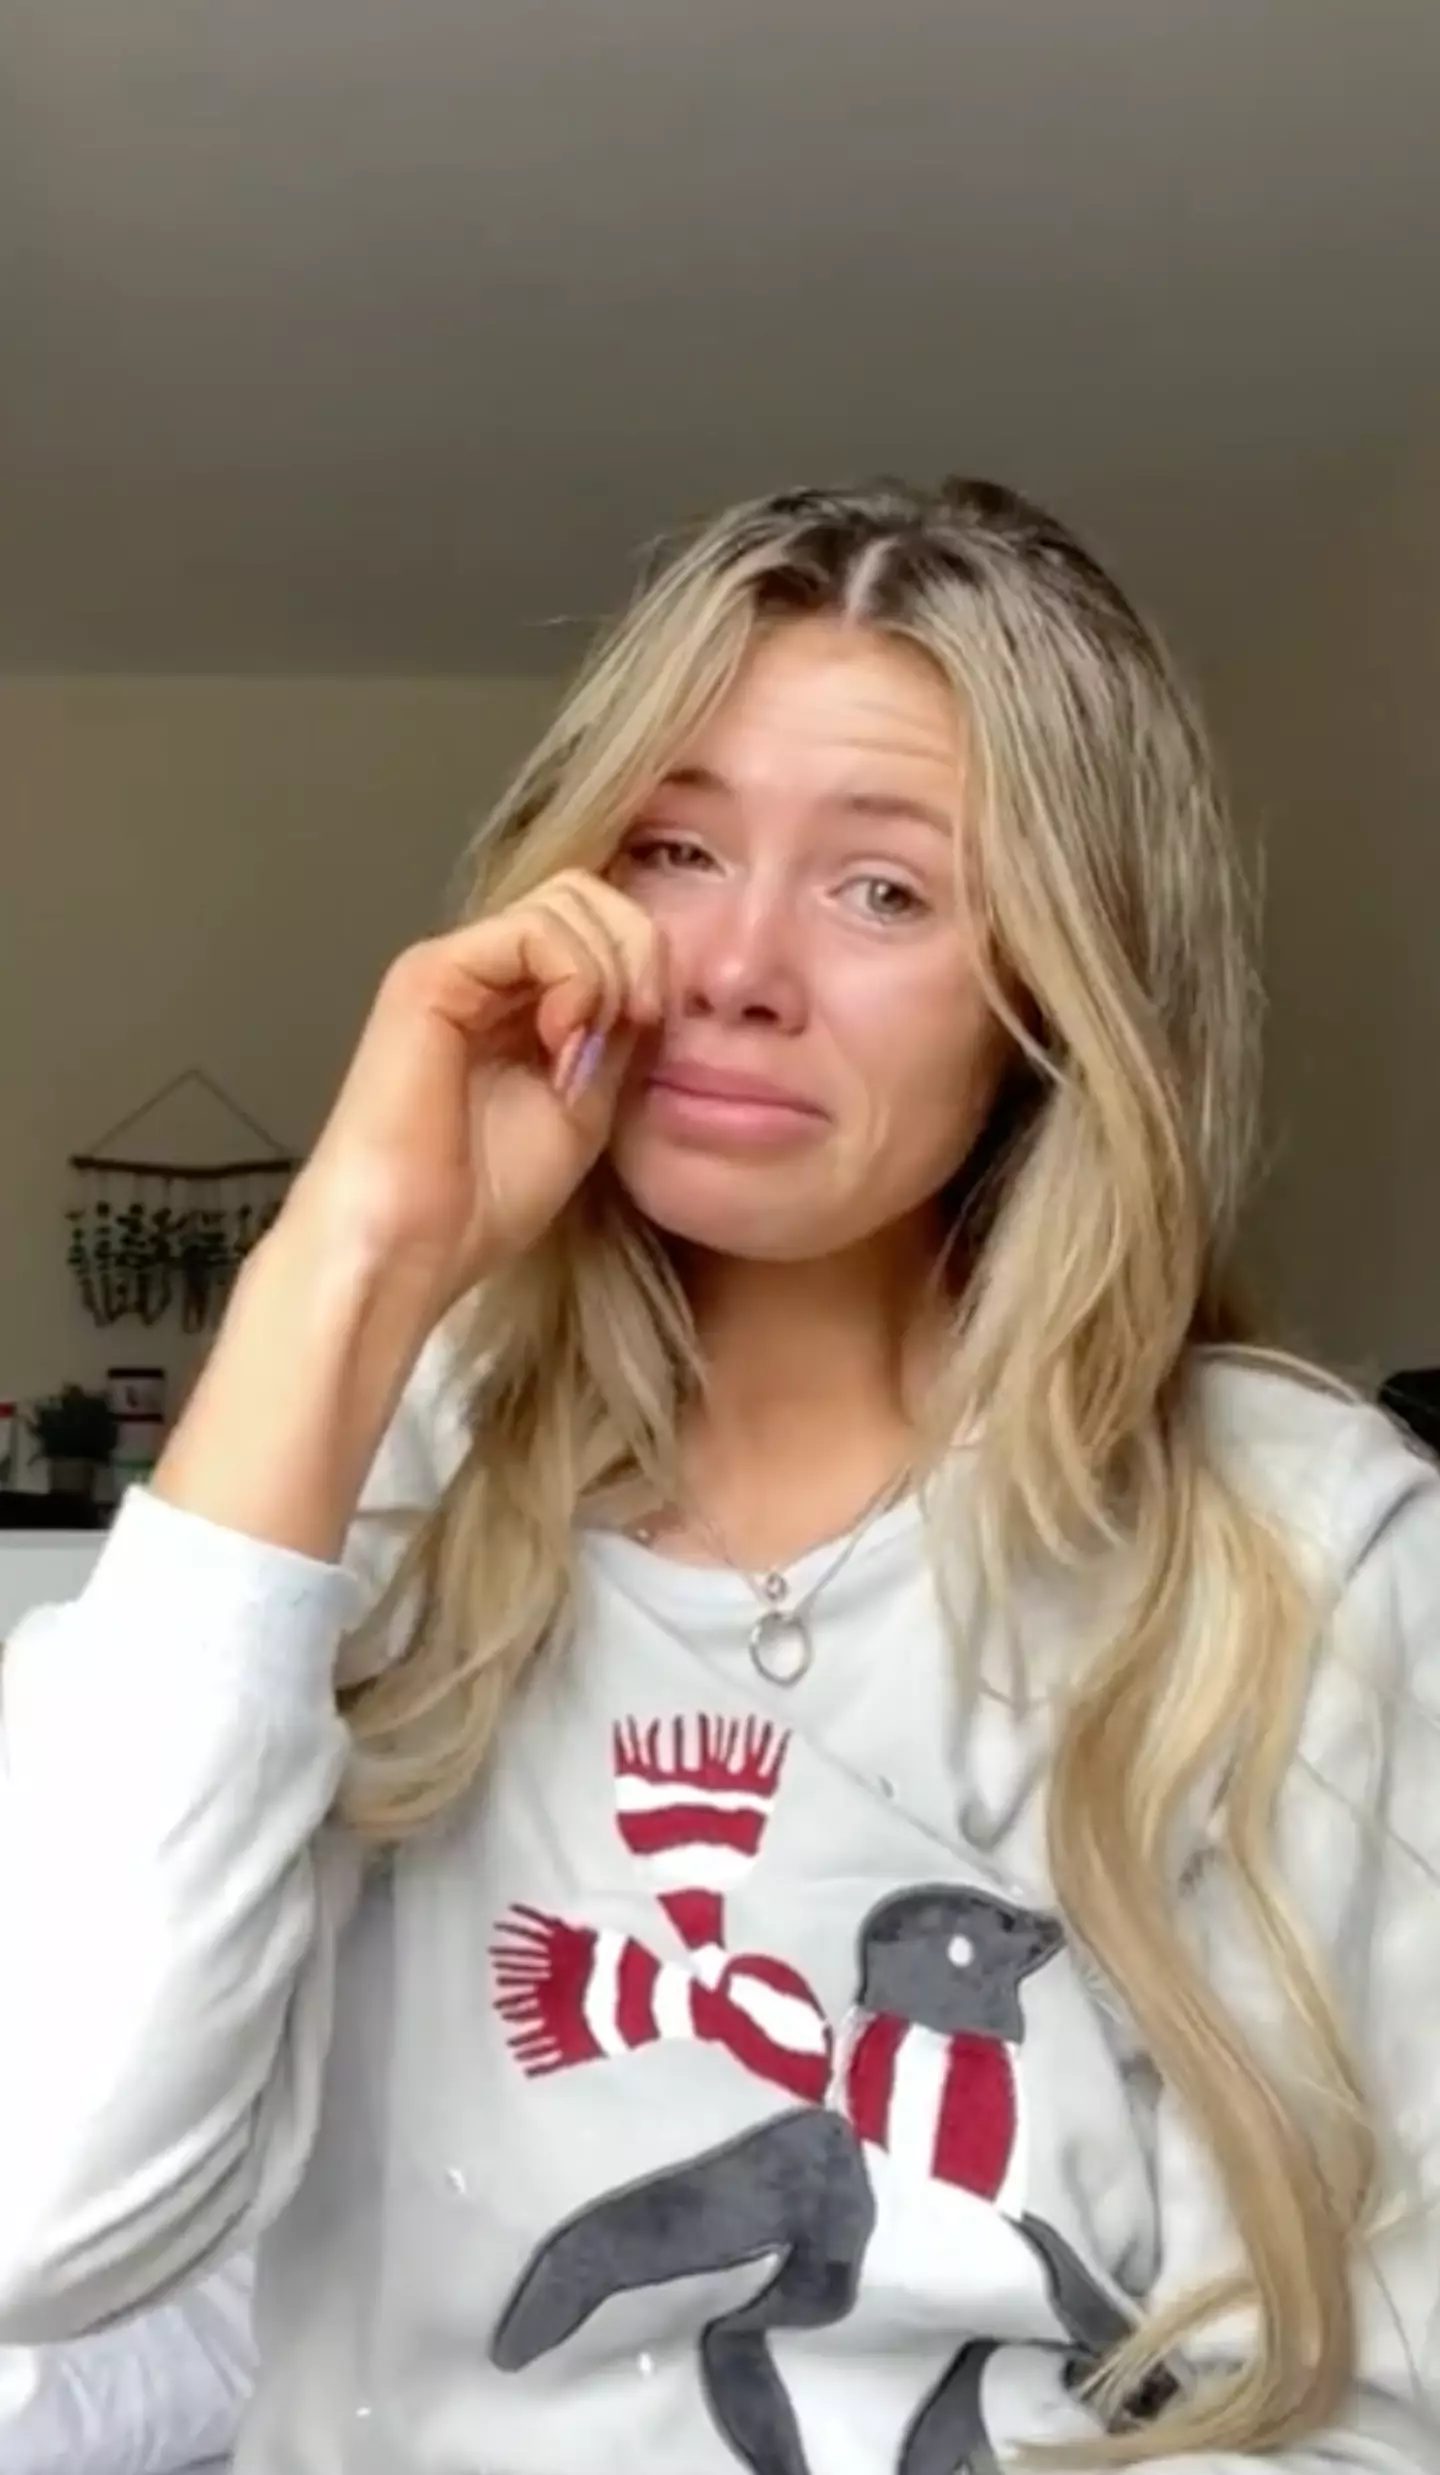 Liana took to TikTok in floods of tears after seeing hurtful comments about her baby boy's name.